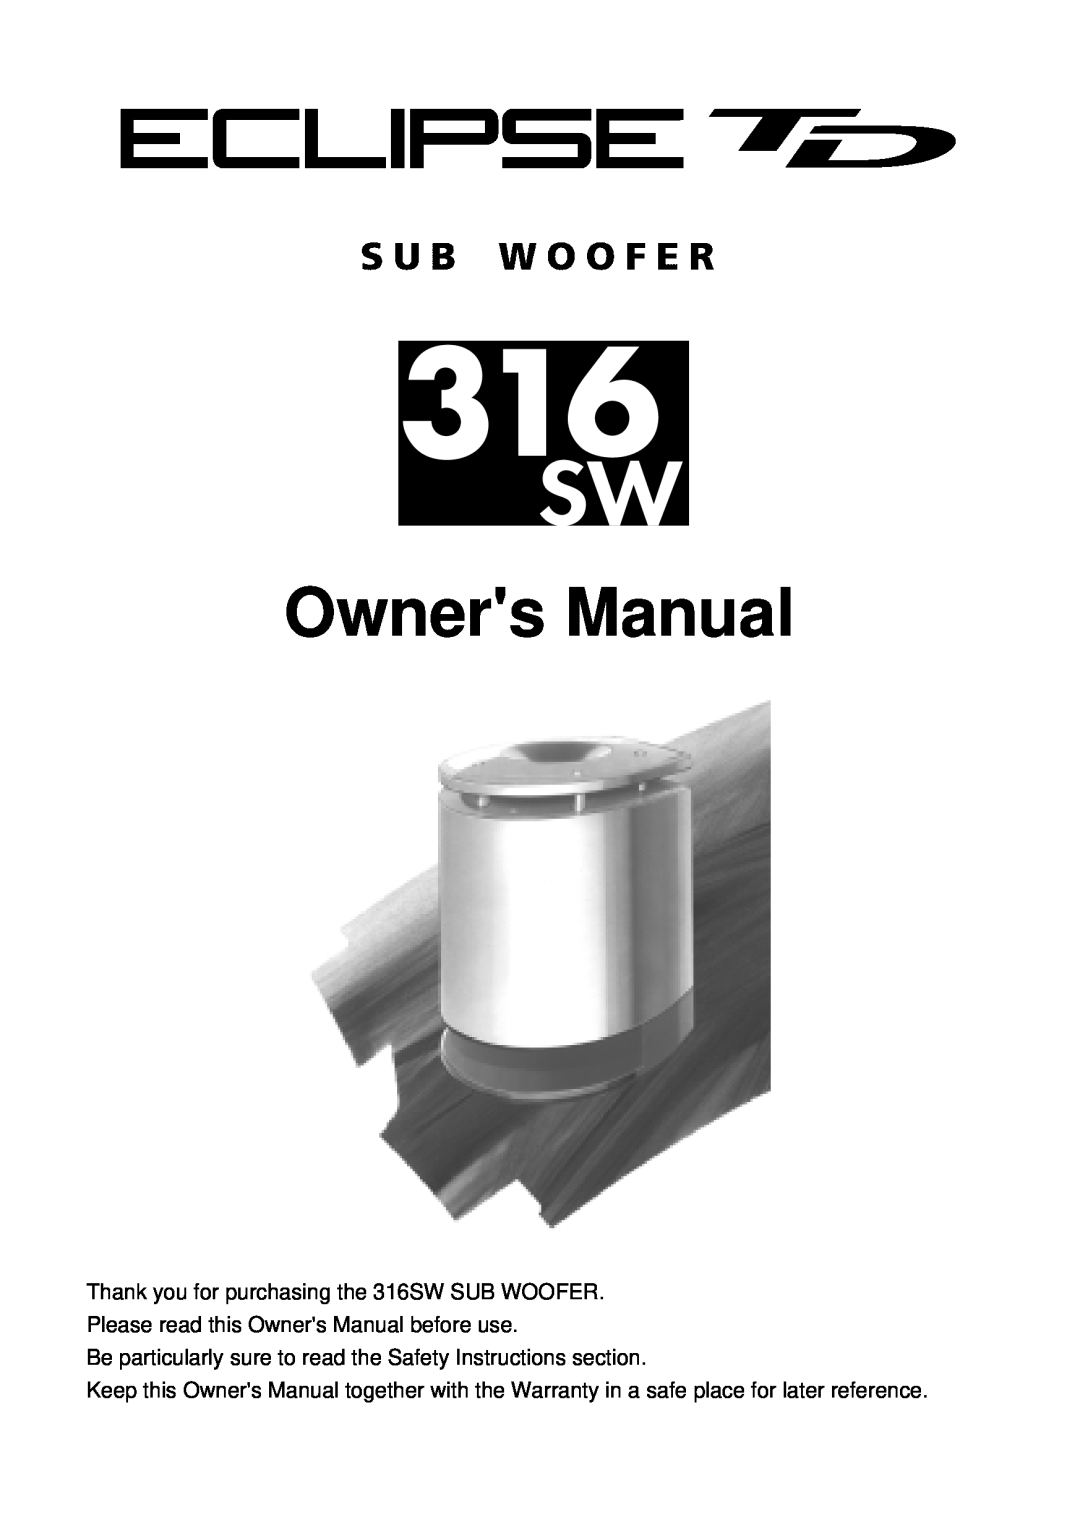 Eclipse - Fujitsu Ten owner manual Owners Manual, Thank you for purchasing the 316SW SUB WOOFER 